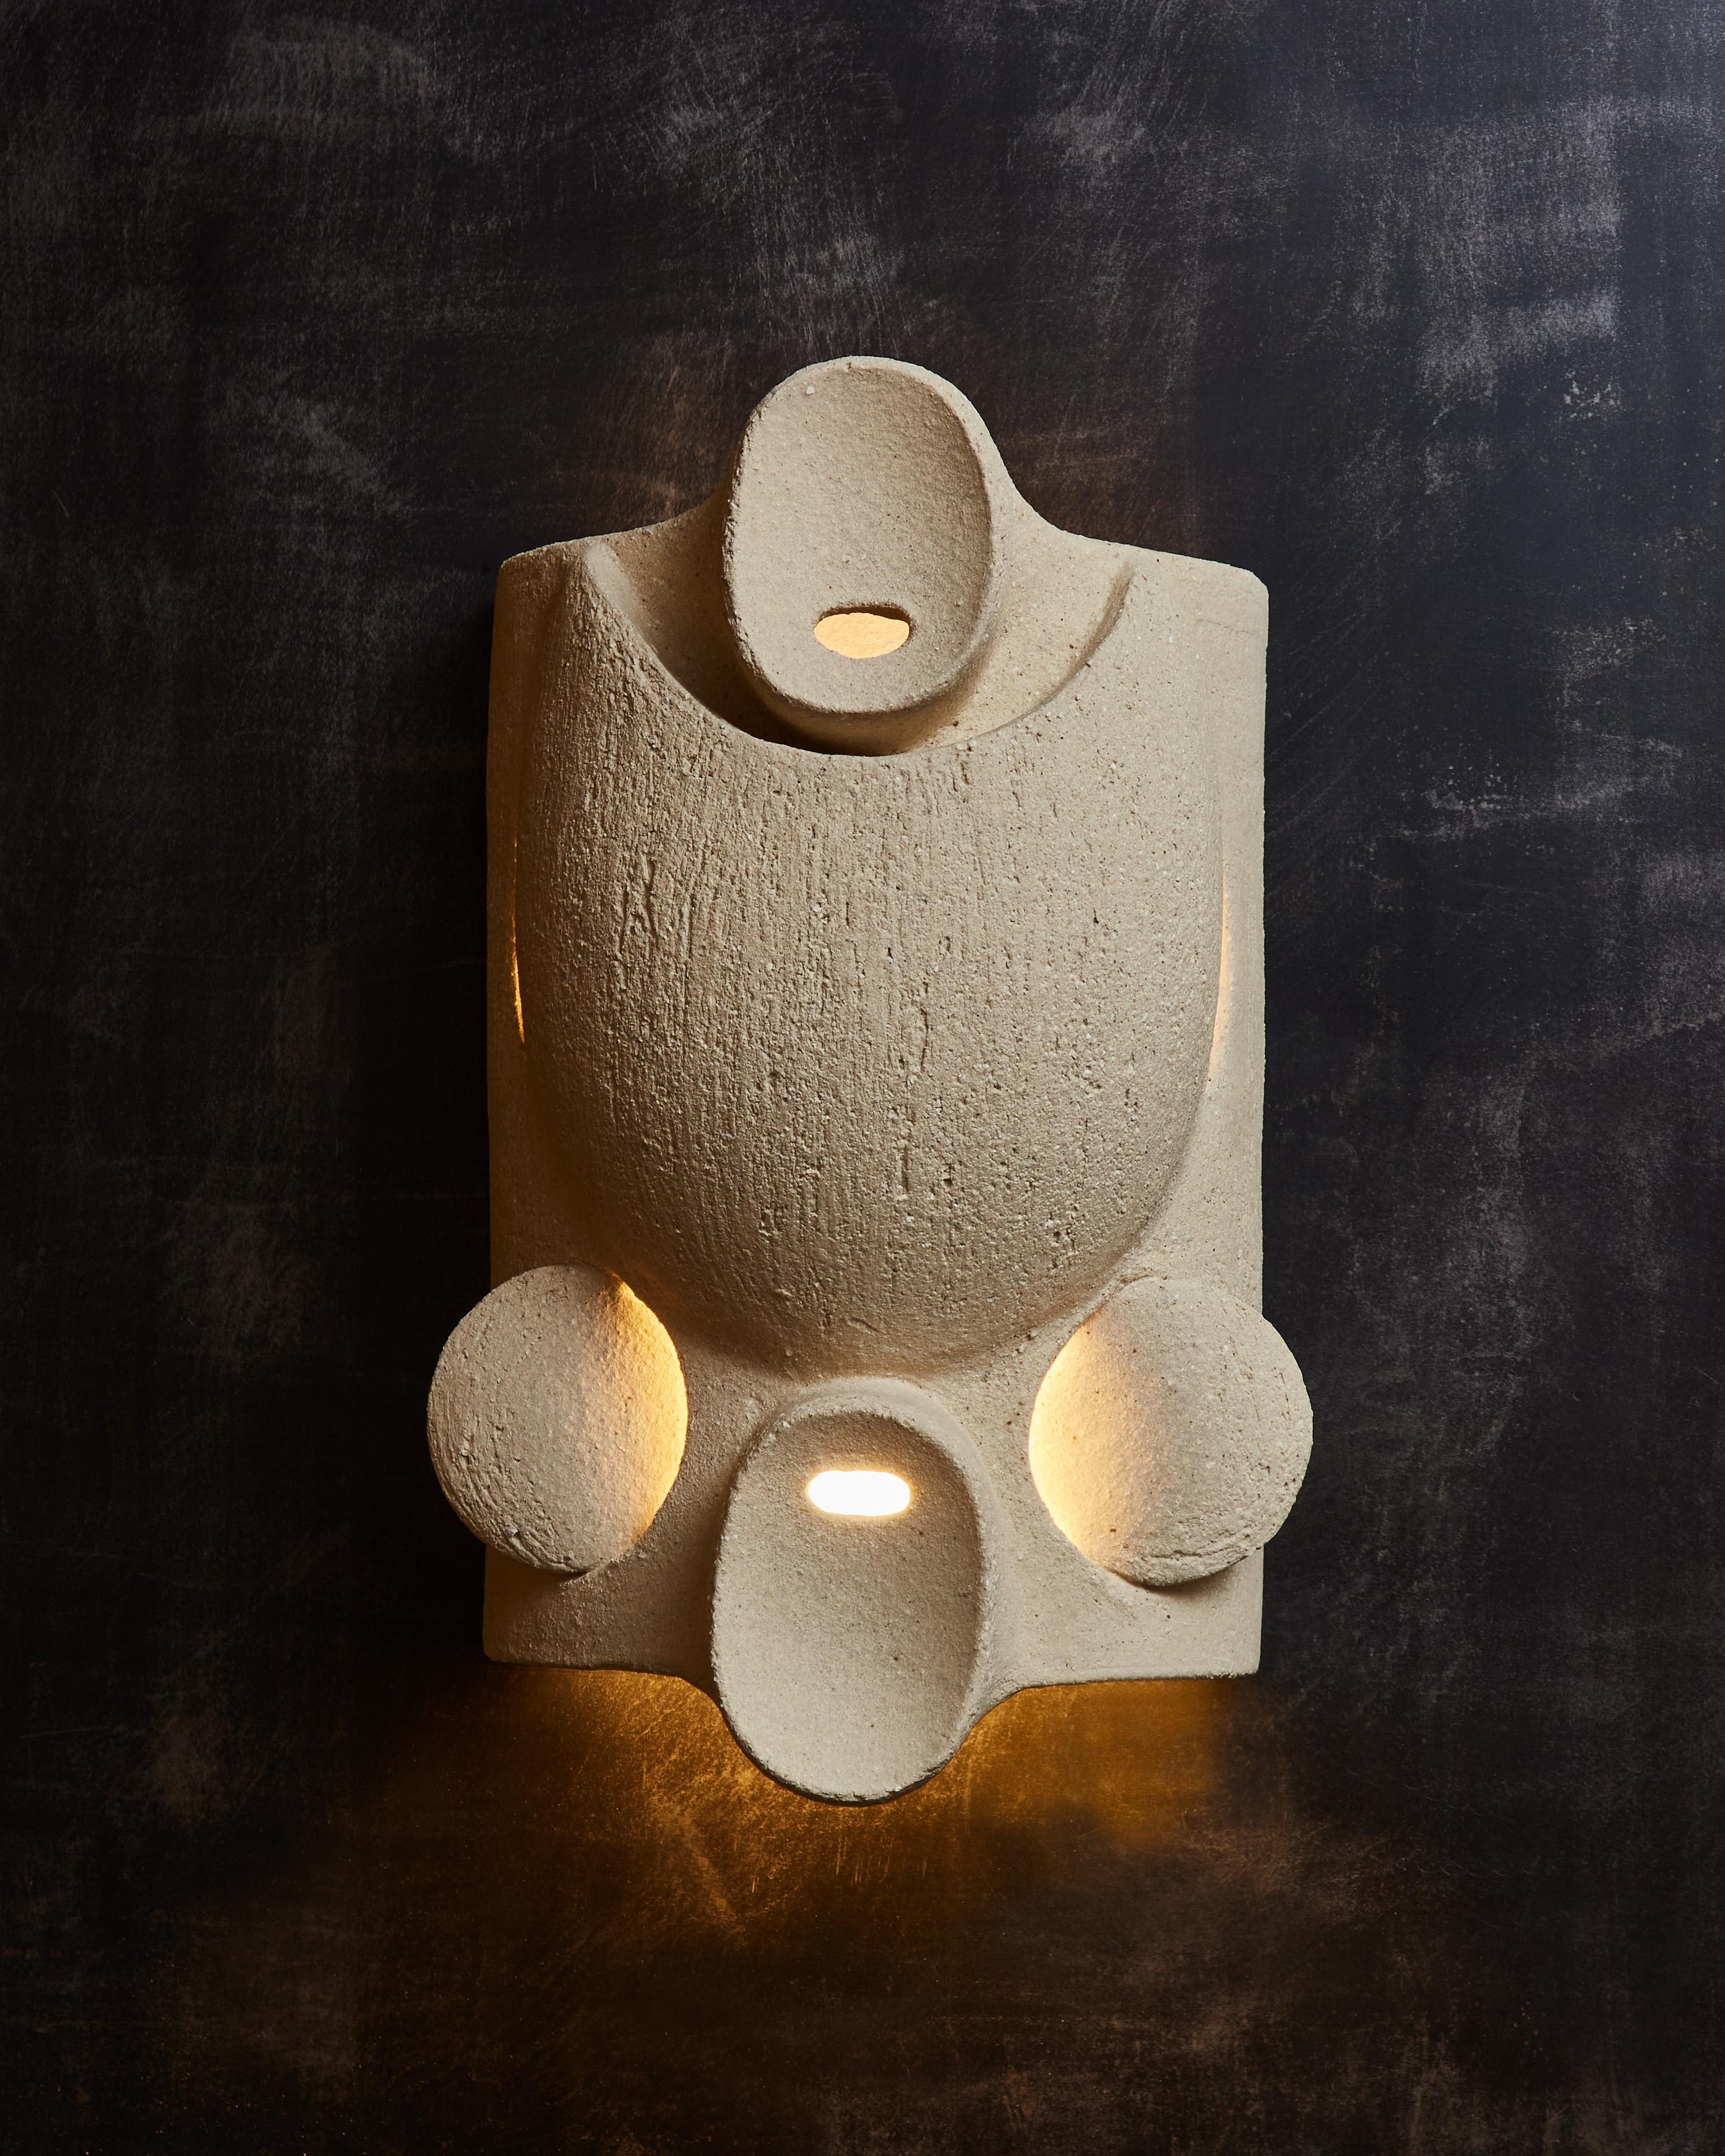 Curved ceramic wall sconces by Olivia Cognet

Since moving to Los Angeles in 2016, French artist and desi- gner Olivia Cognet has focused on ceramics as the fertile medium through which she expresses her boundless creativity. 
With the freedom